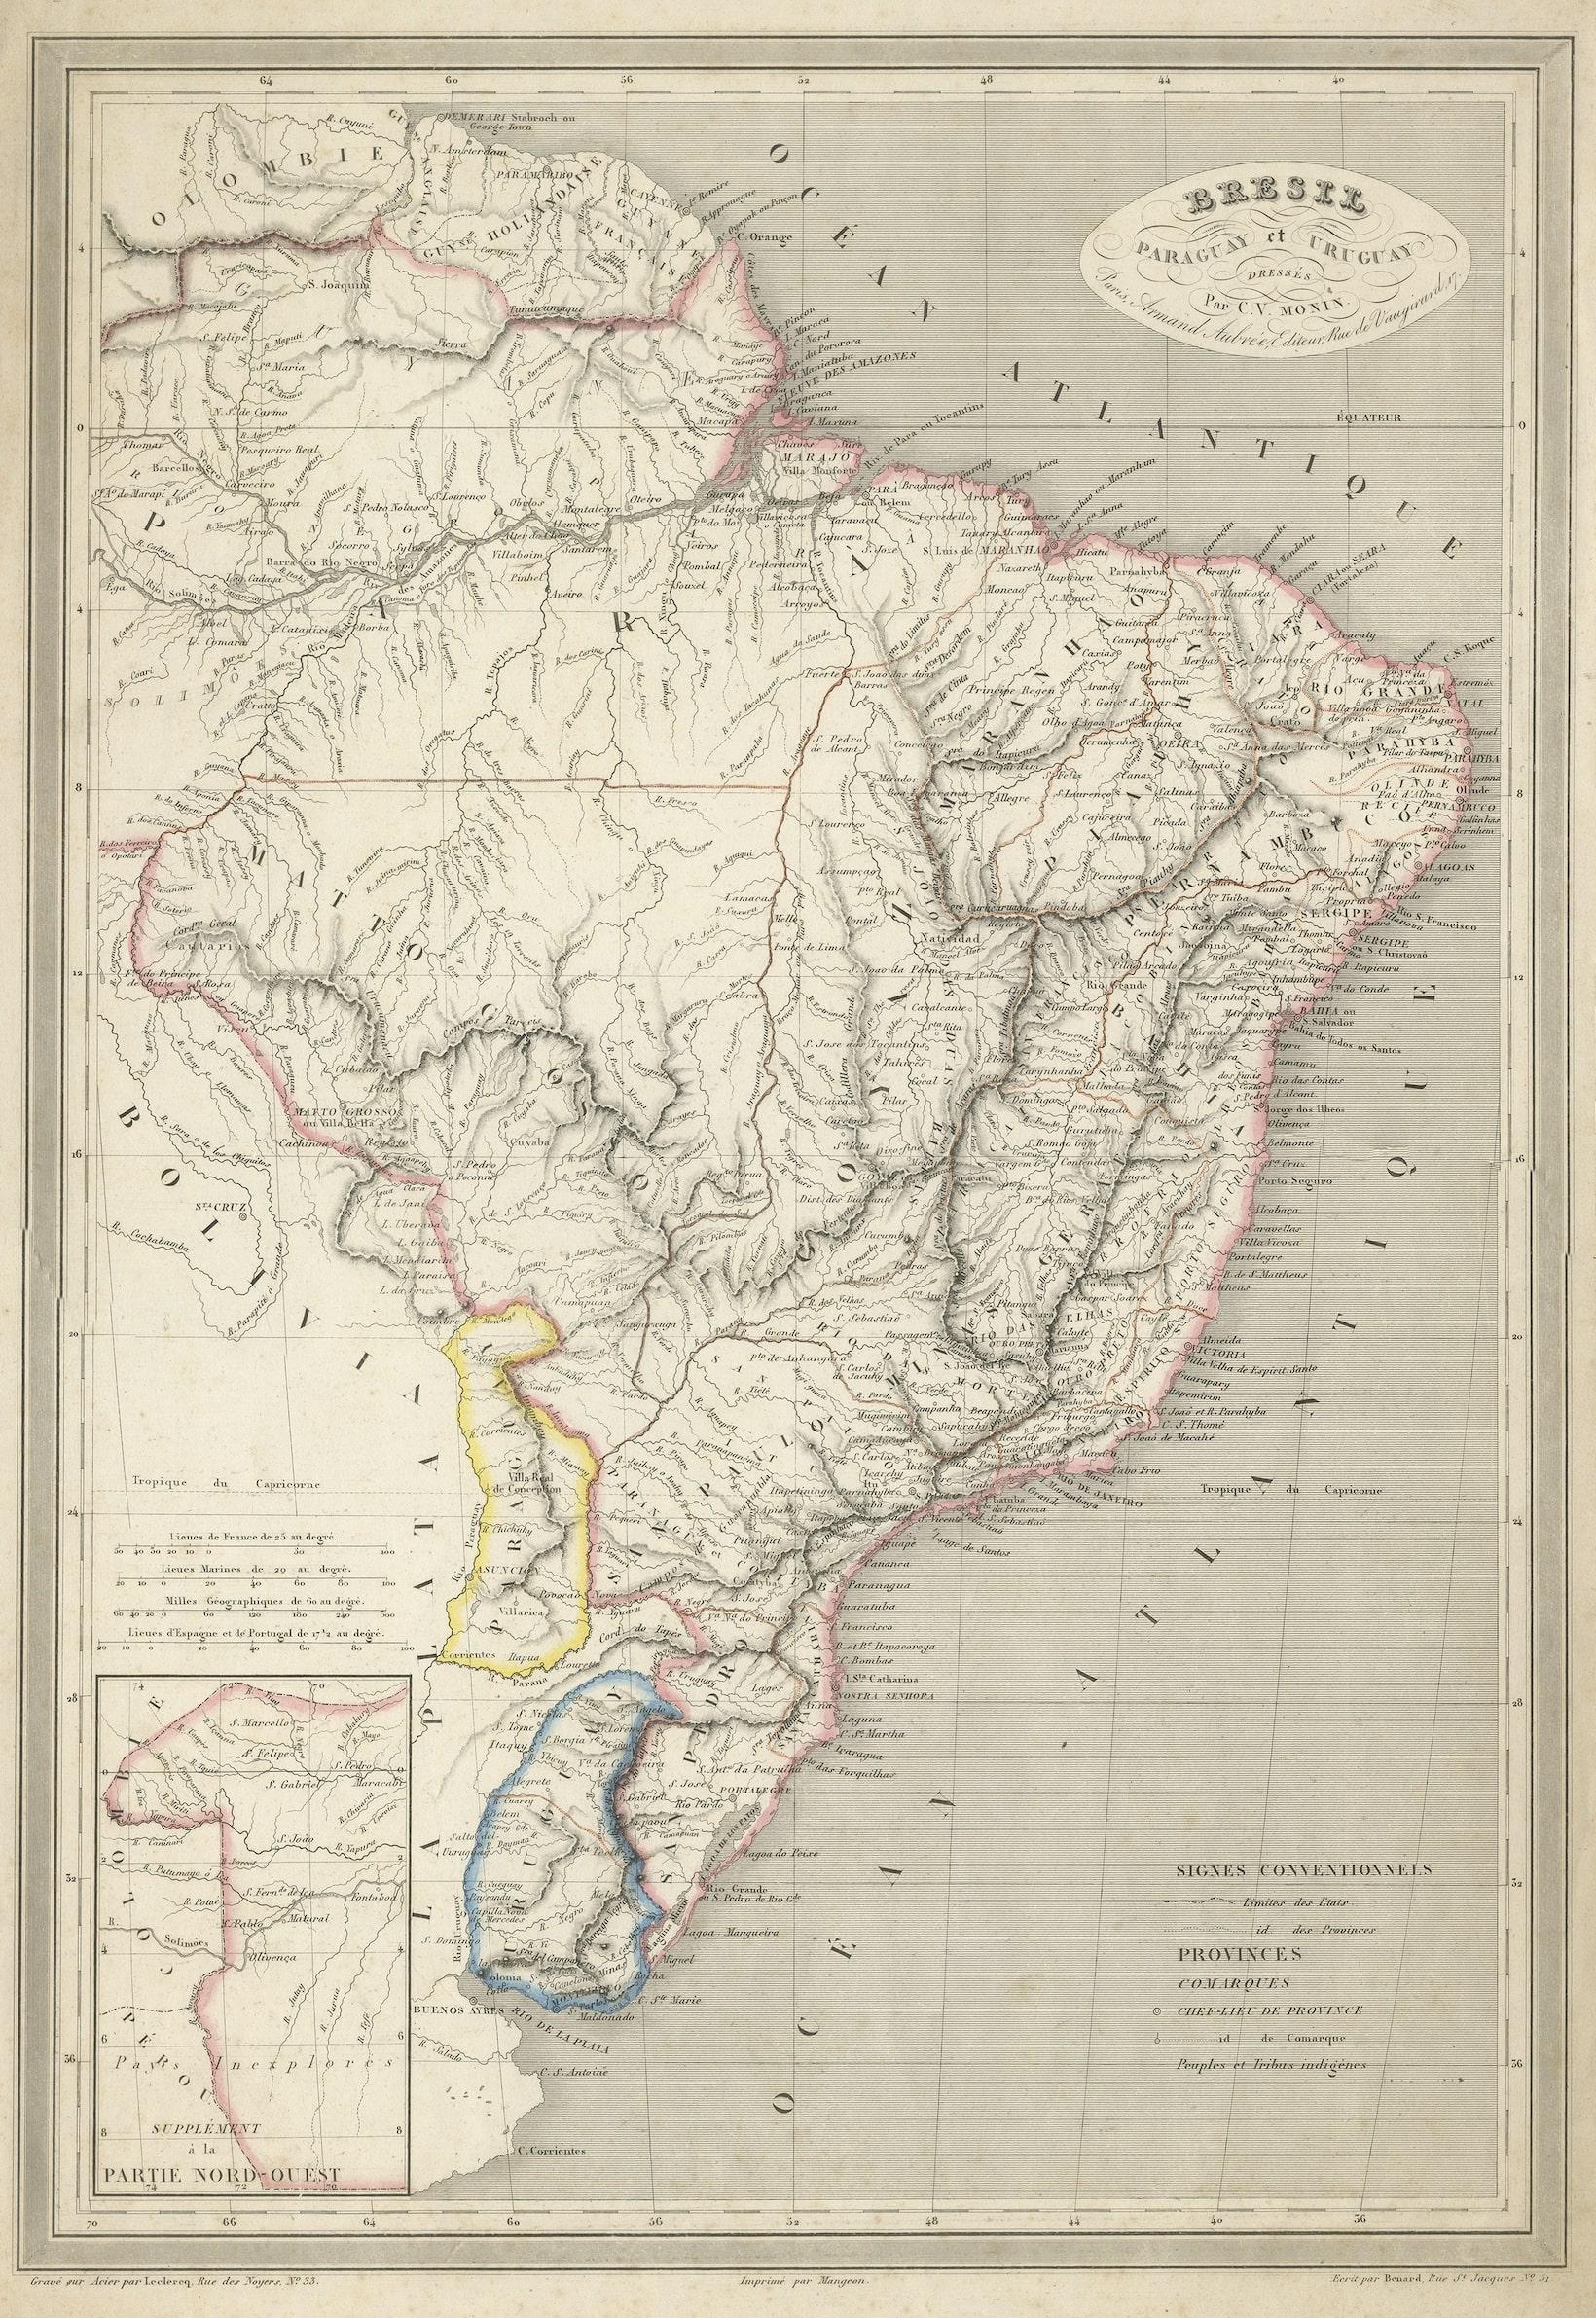 Antique map titled 'Bresil Paraguay et Uruguay'. Fine steel engraved map of Brazil, Paraguay and Uruguay. Engraved by Leclercq and published by Armand Aubree in 